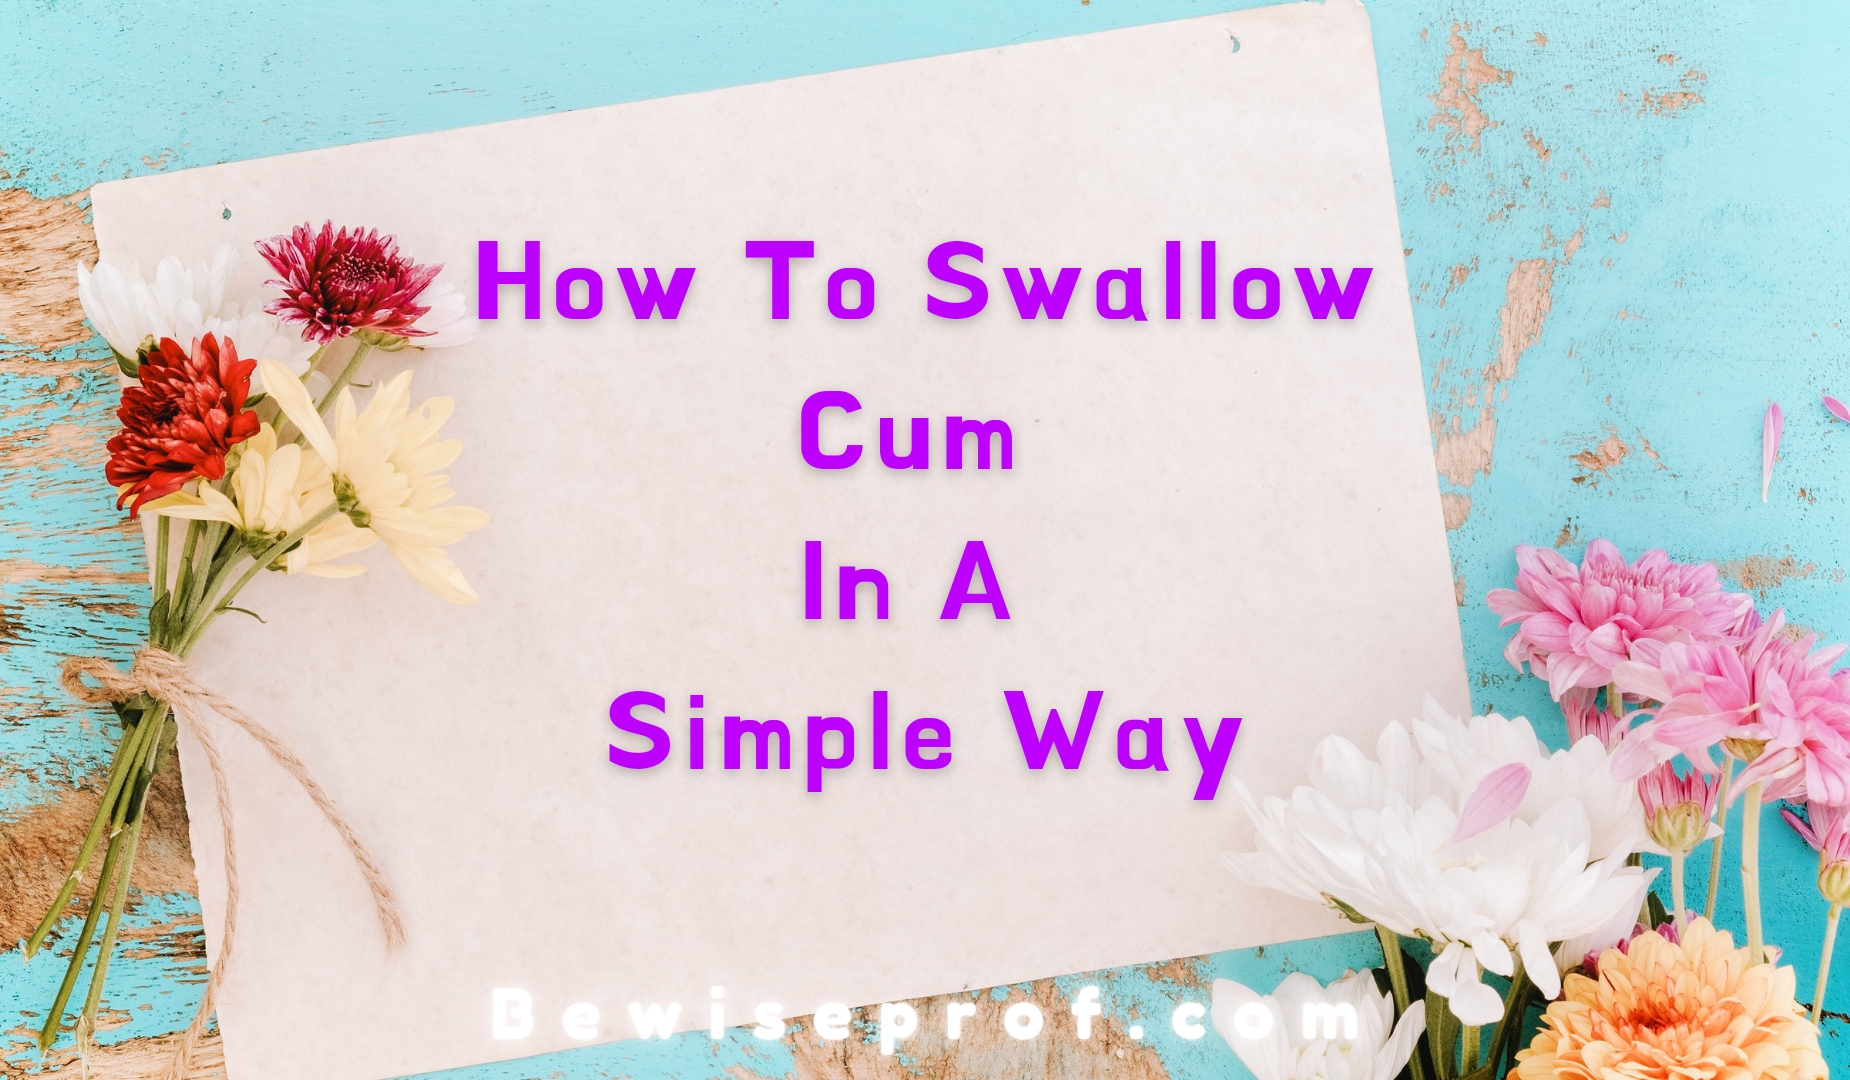 How To Swallow Cum In A Simple Way